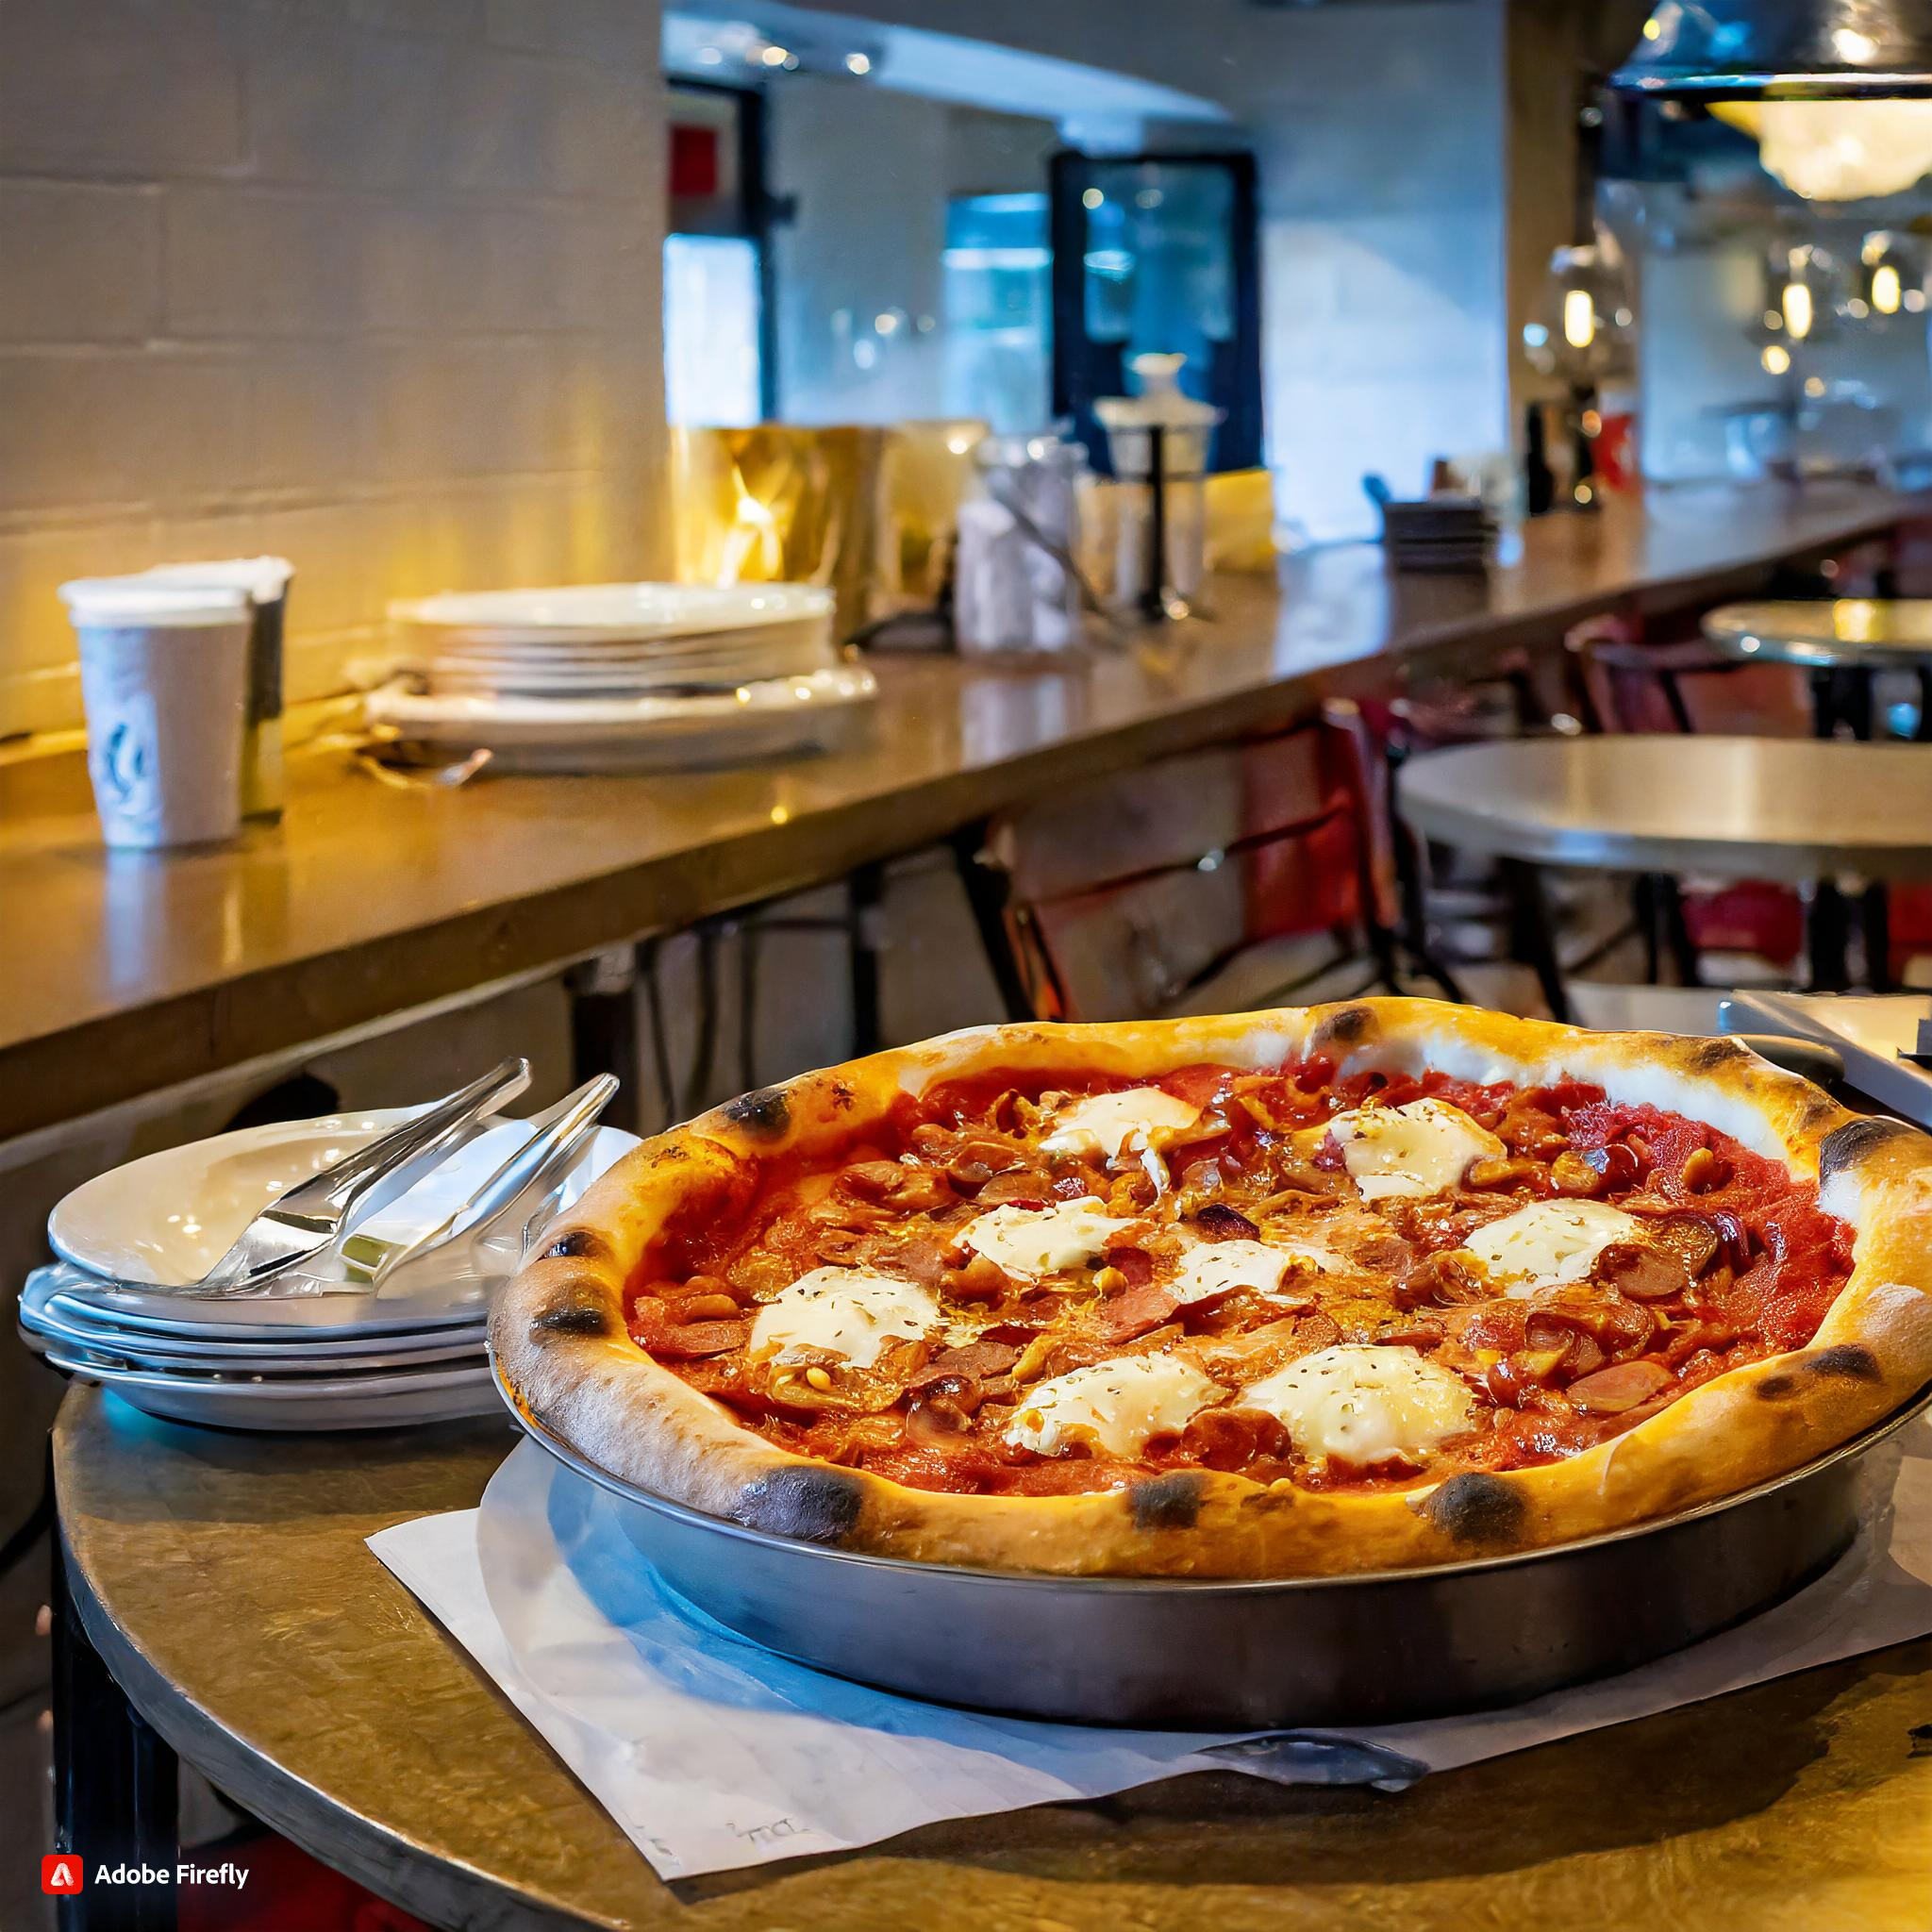  Firefly Pizza parlor in Chicago, deep dish, windy 13912.jpg